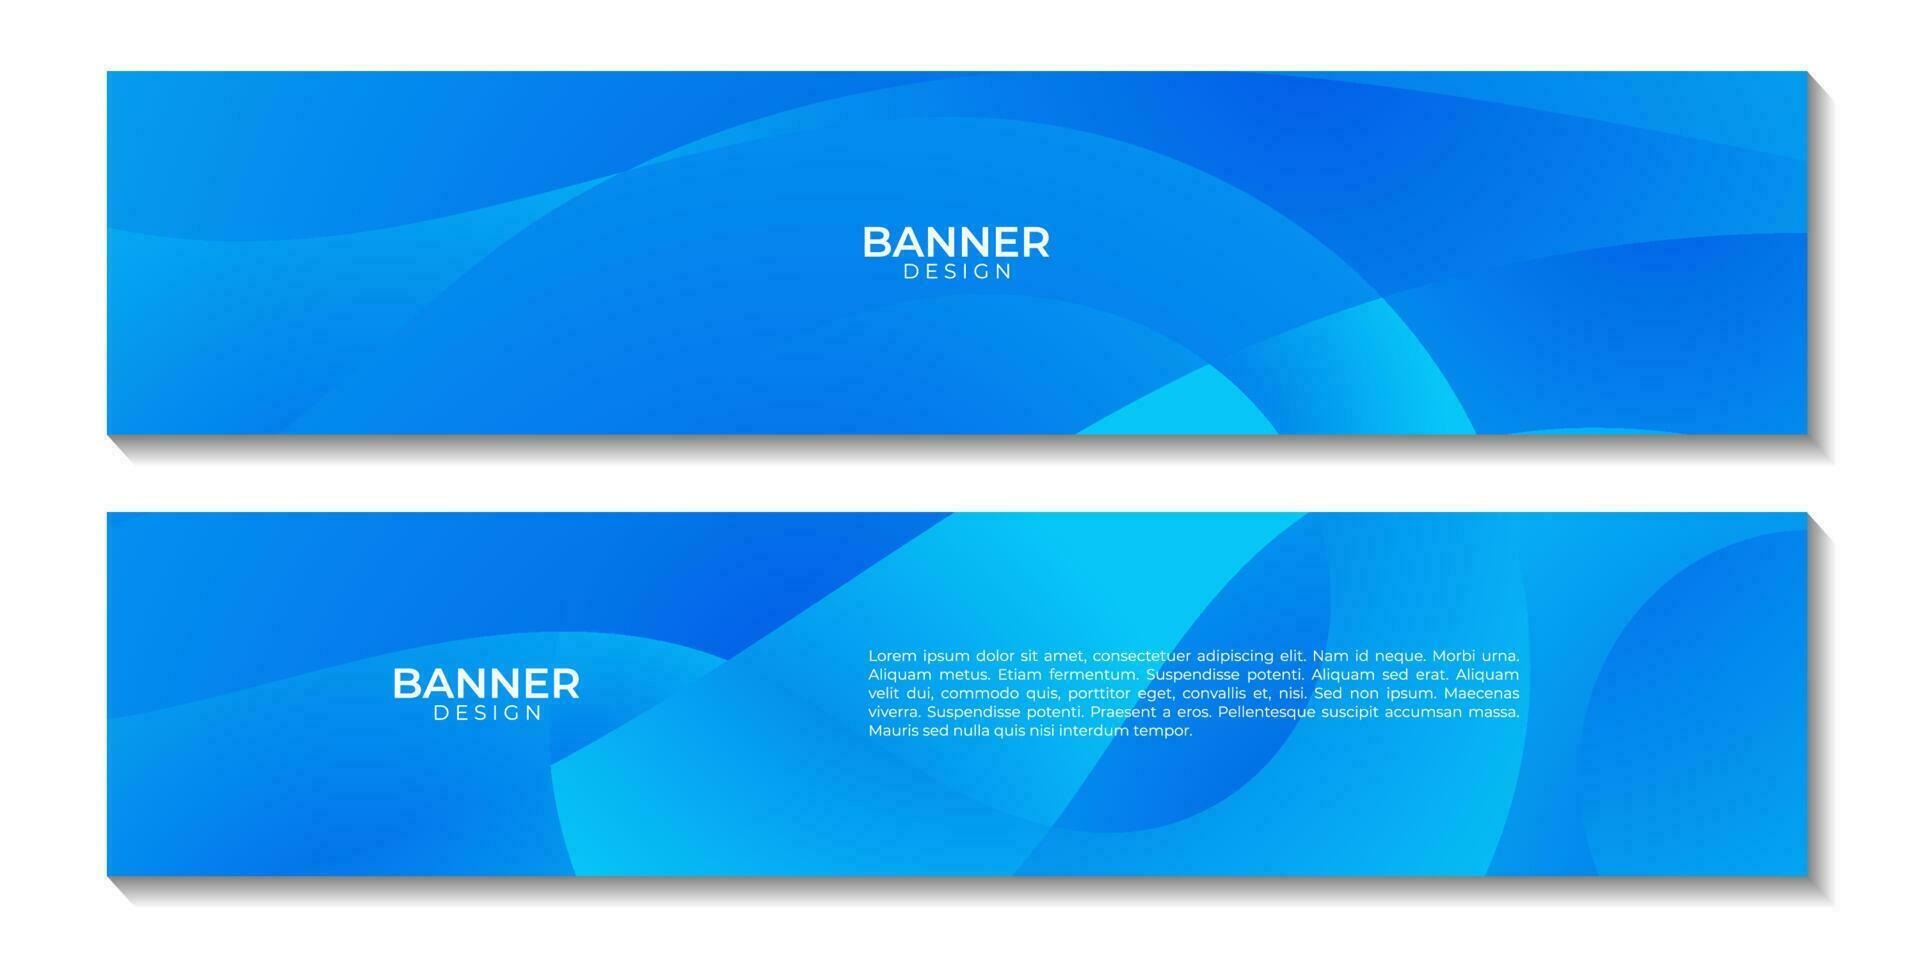 set of social media banners with abstract modern blue sea wave background. vector illustration